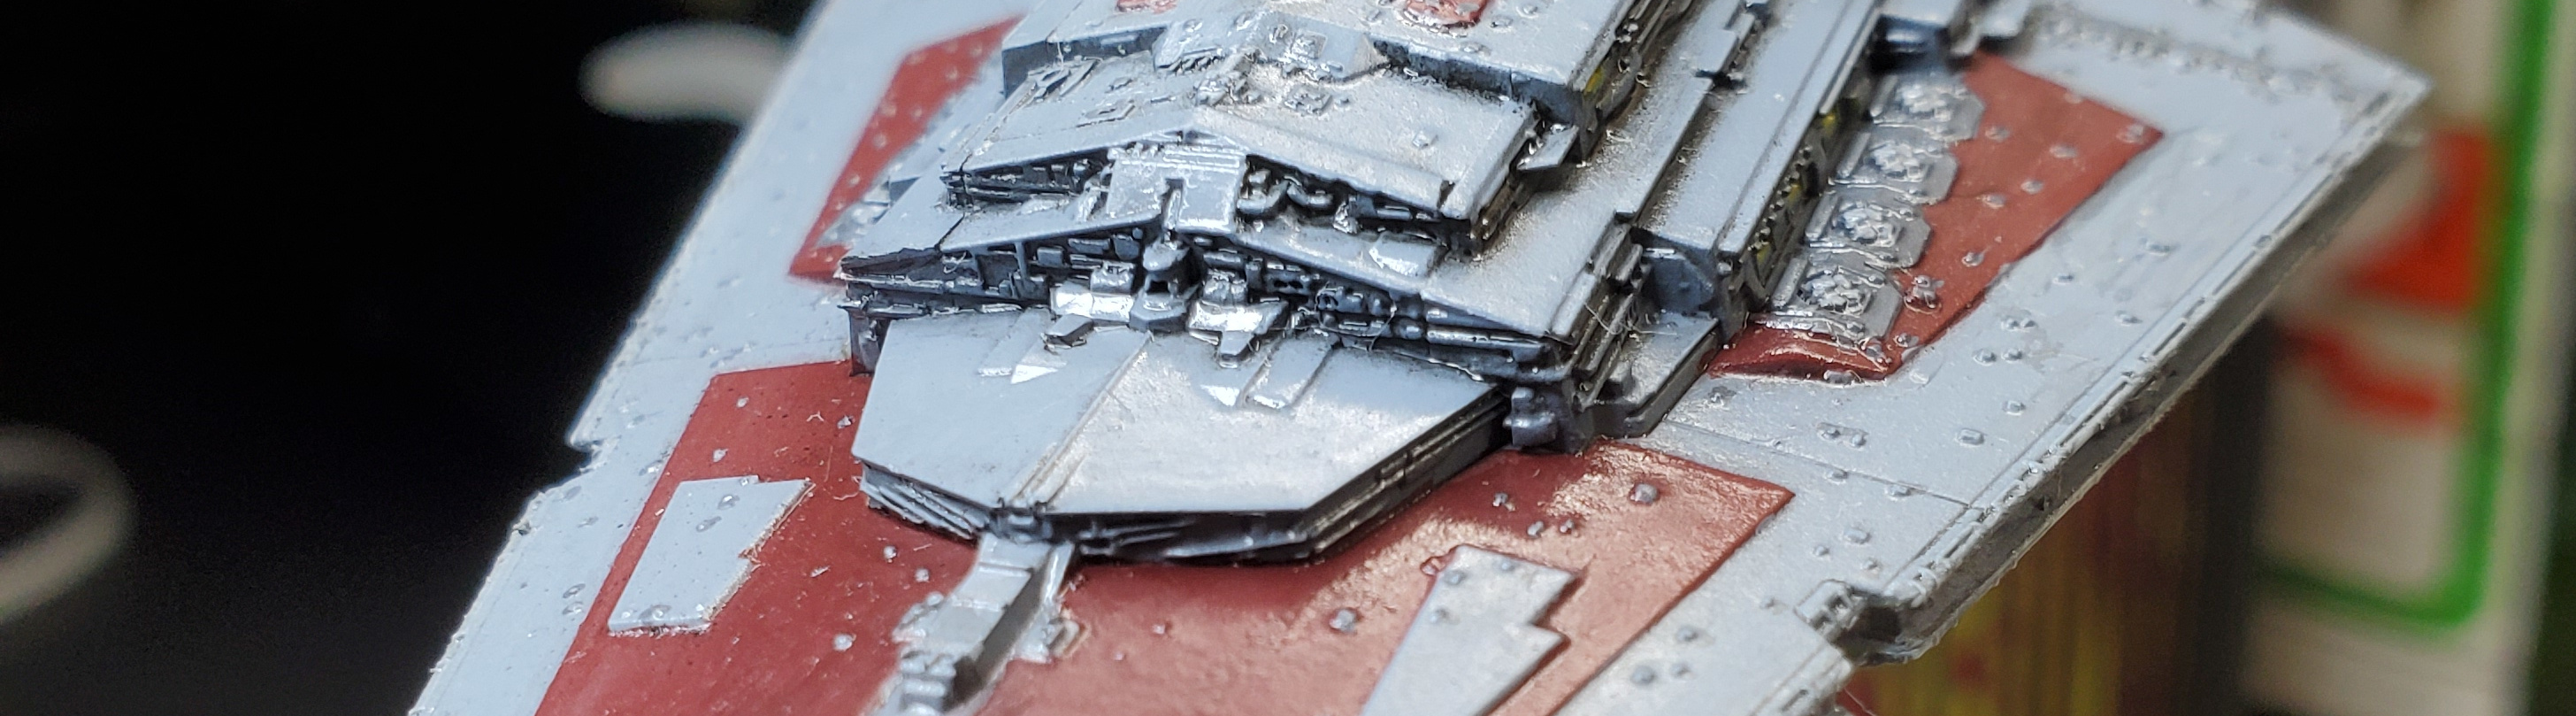 close-up of an Imperial Destroyer miniature